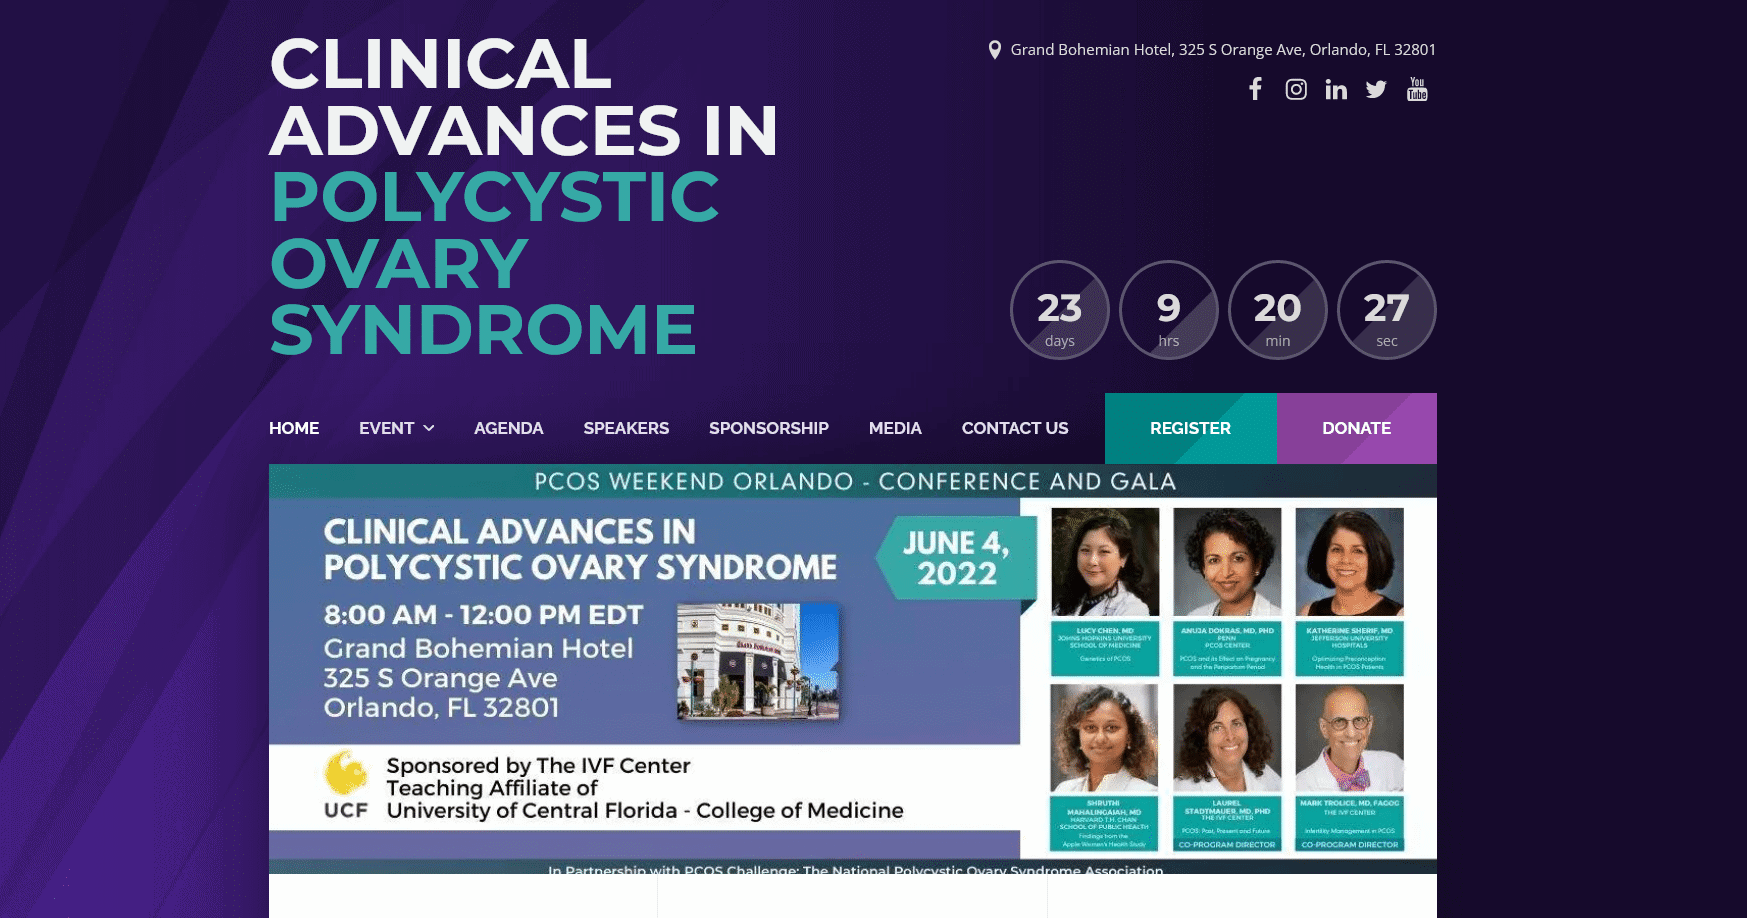 screenshot 2022 05 18 at 15 39 31 homepage clinical advances in polycystic ovary syndrome